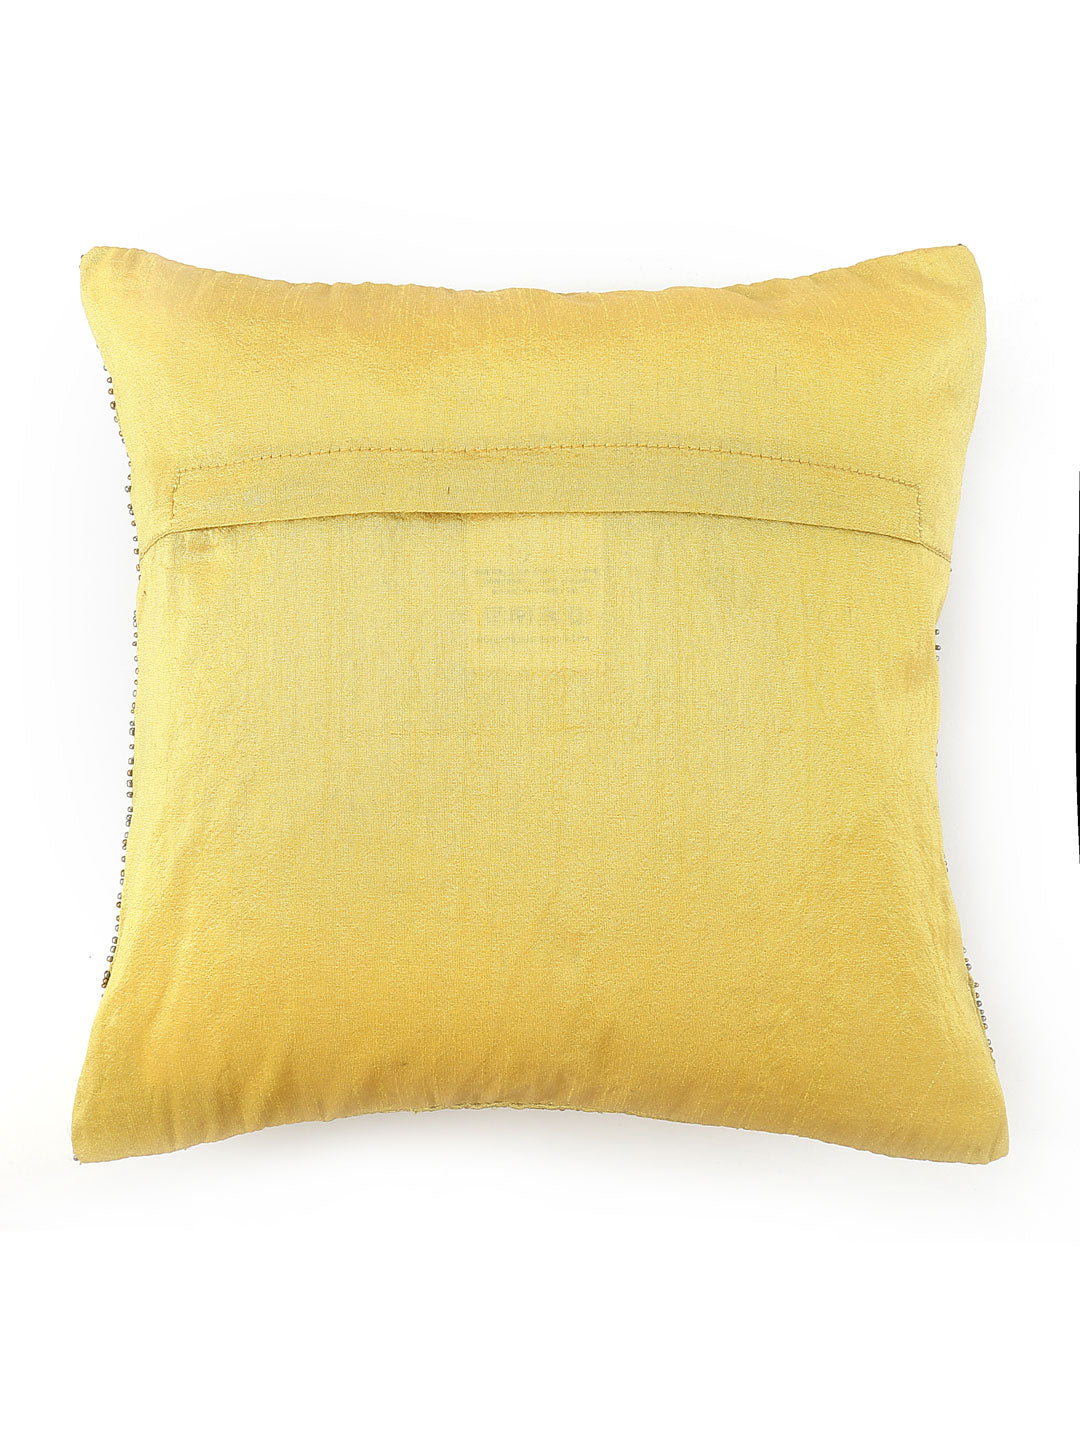 Bands Cushion Cover (Yellow)